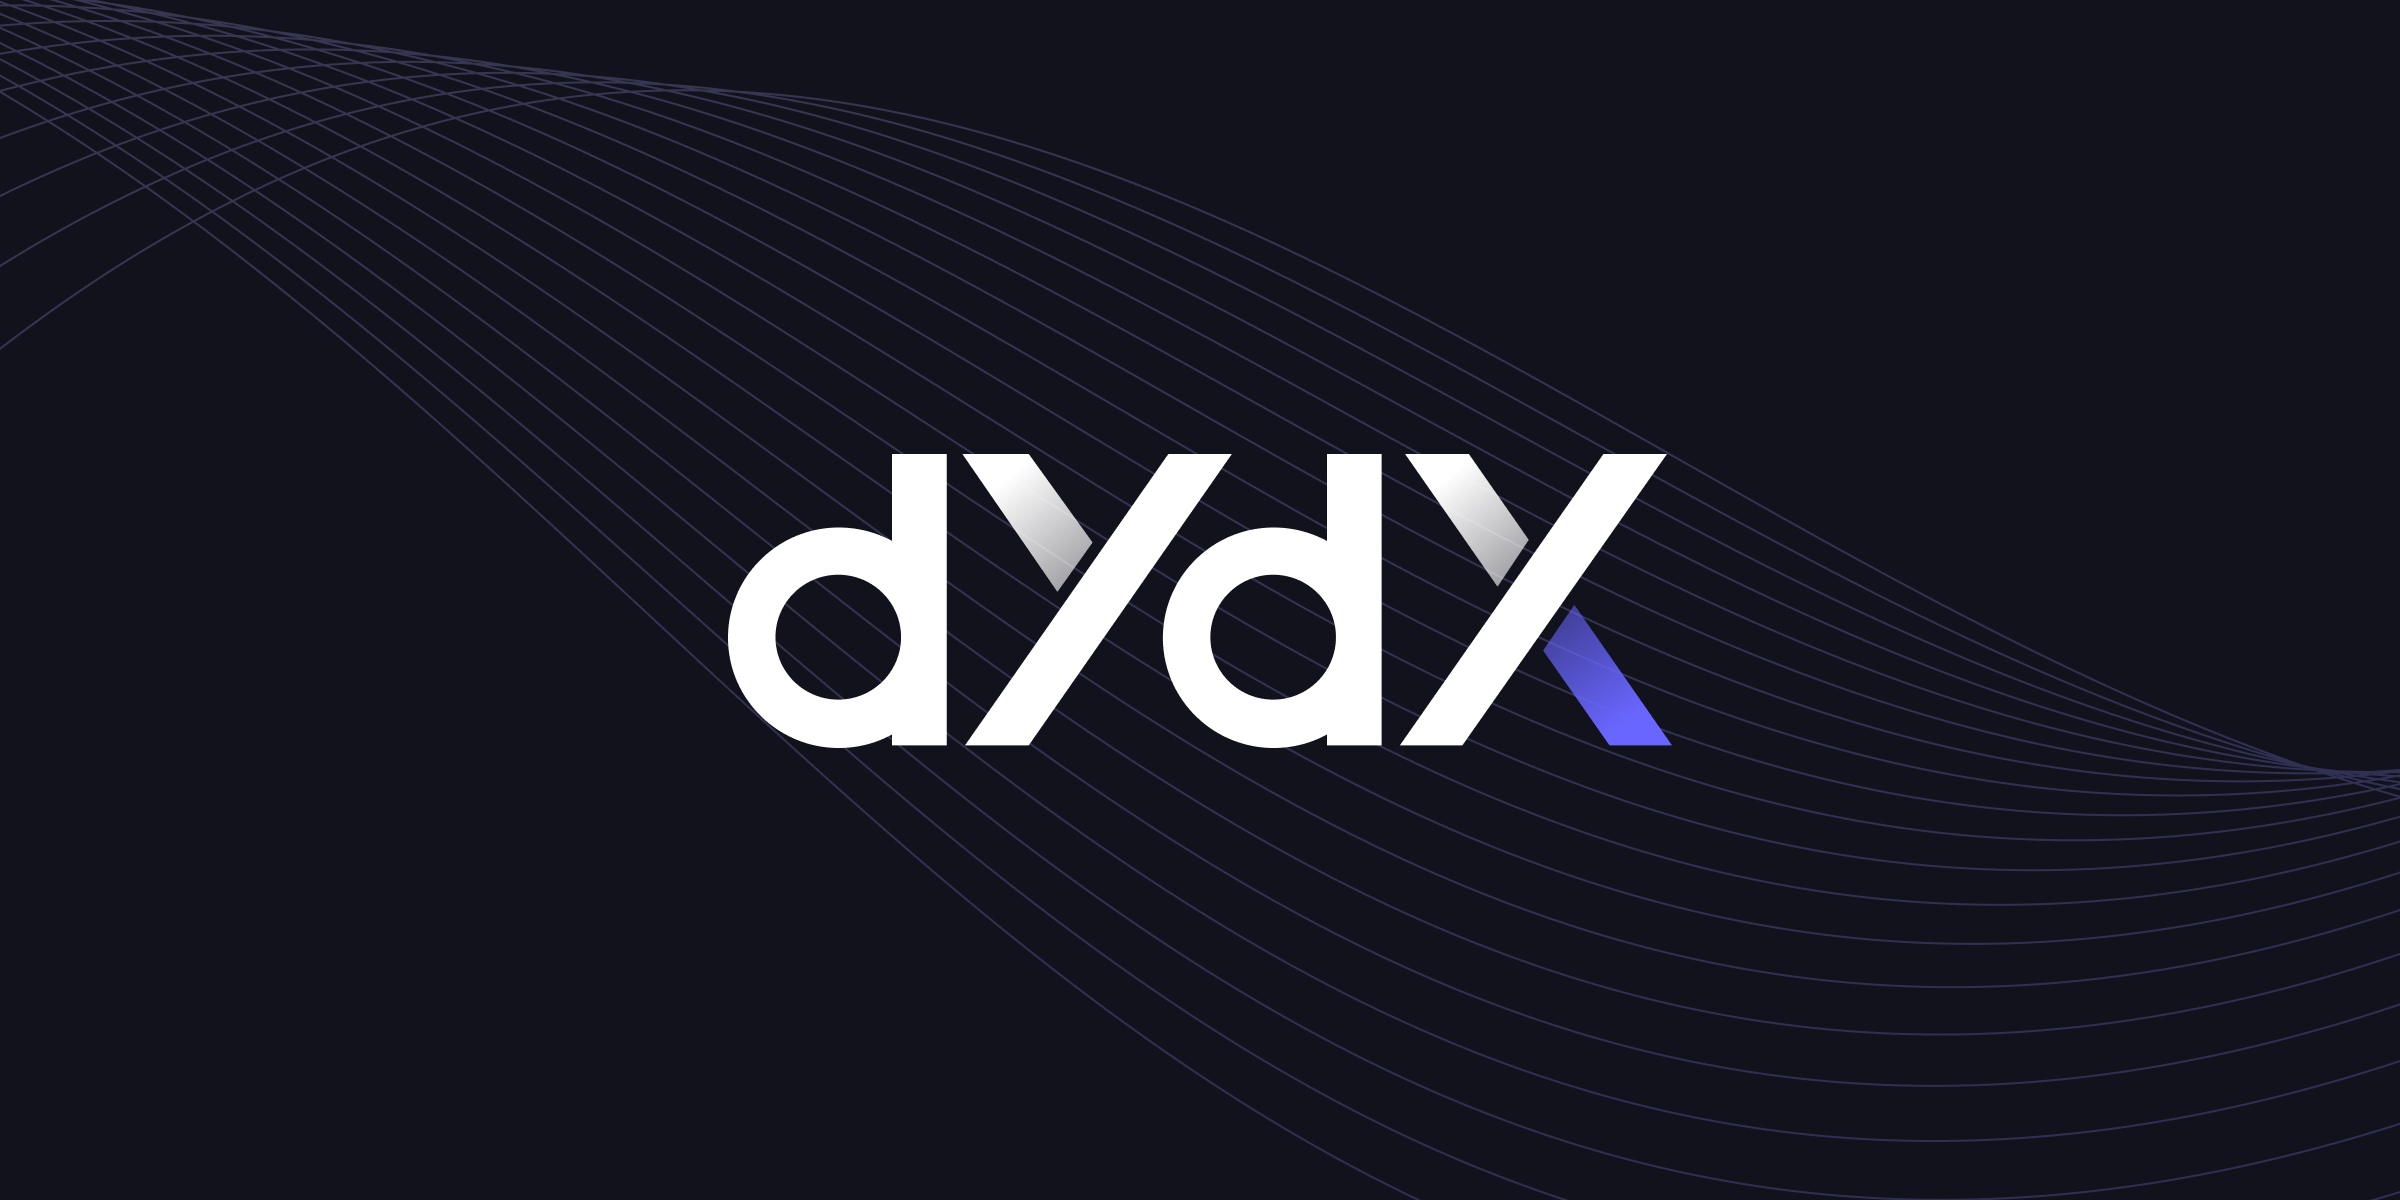 DYDX Price Analysis: A Drop to $2.134 or the 200-day MA at $1.94 Looks Next